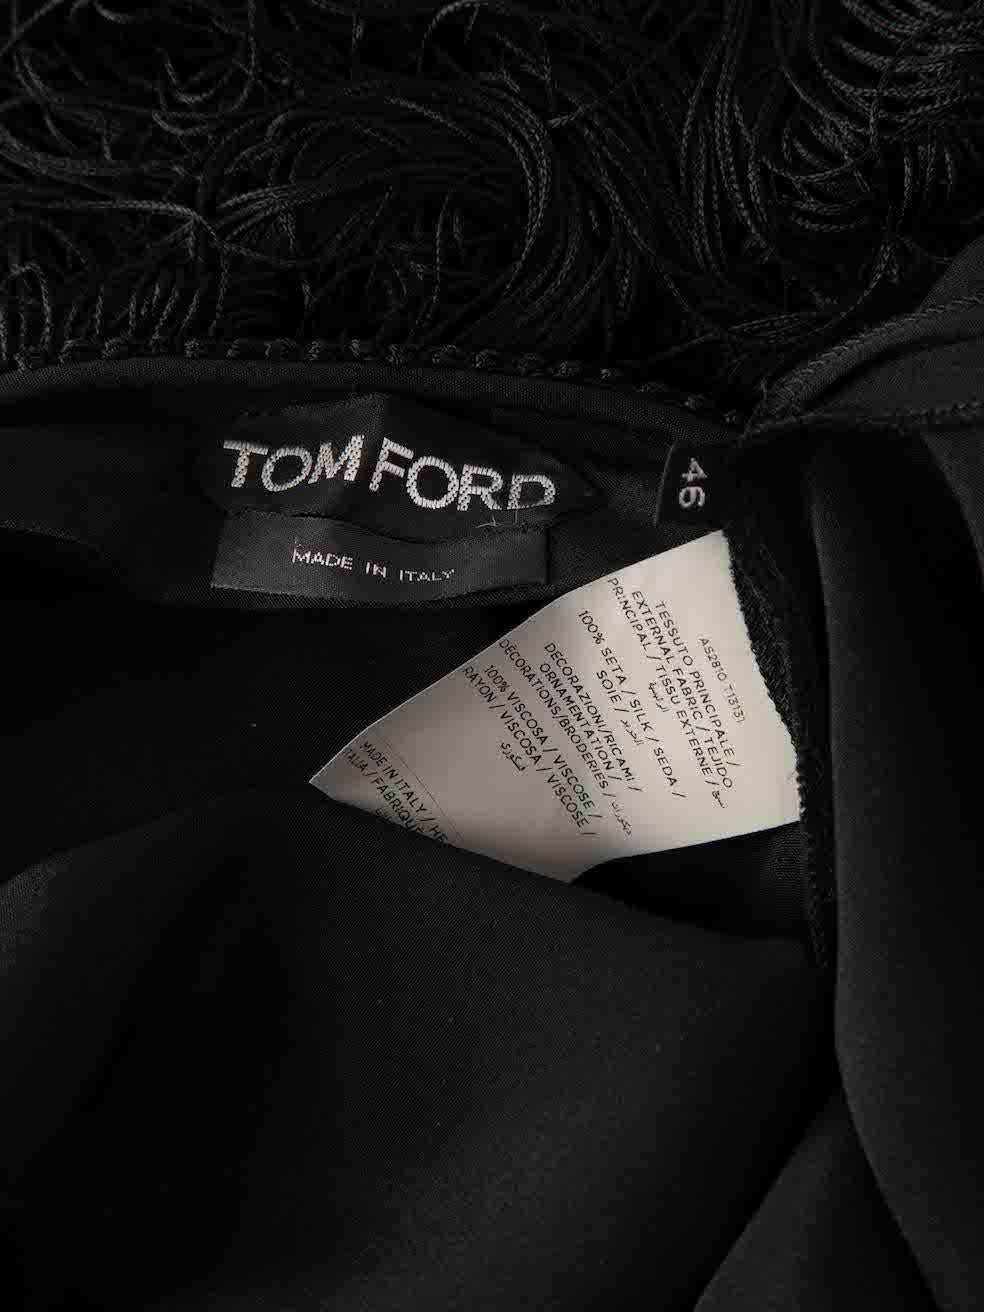 Tom Ford Women's Black Silk Fringed Maxi Dress In Good Condition For Sale In London, GB